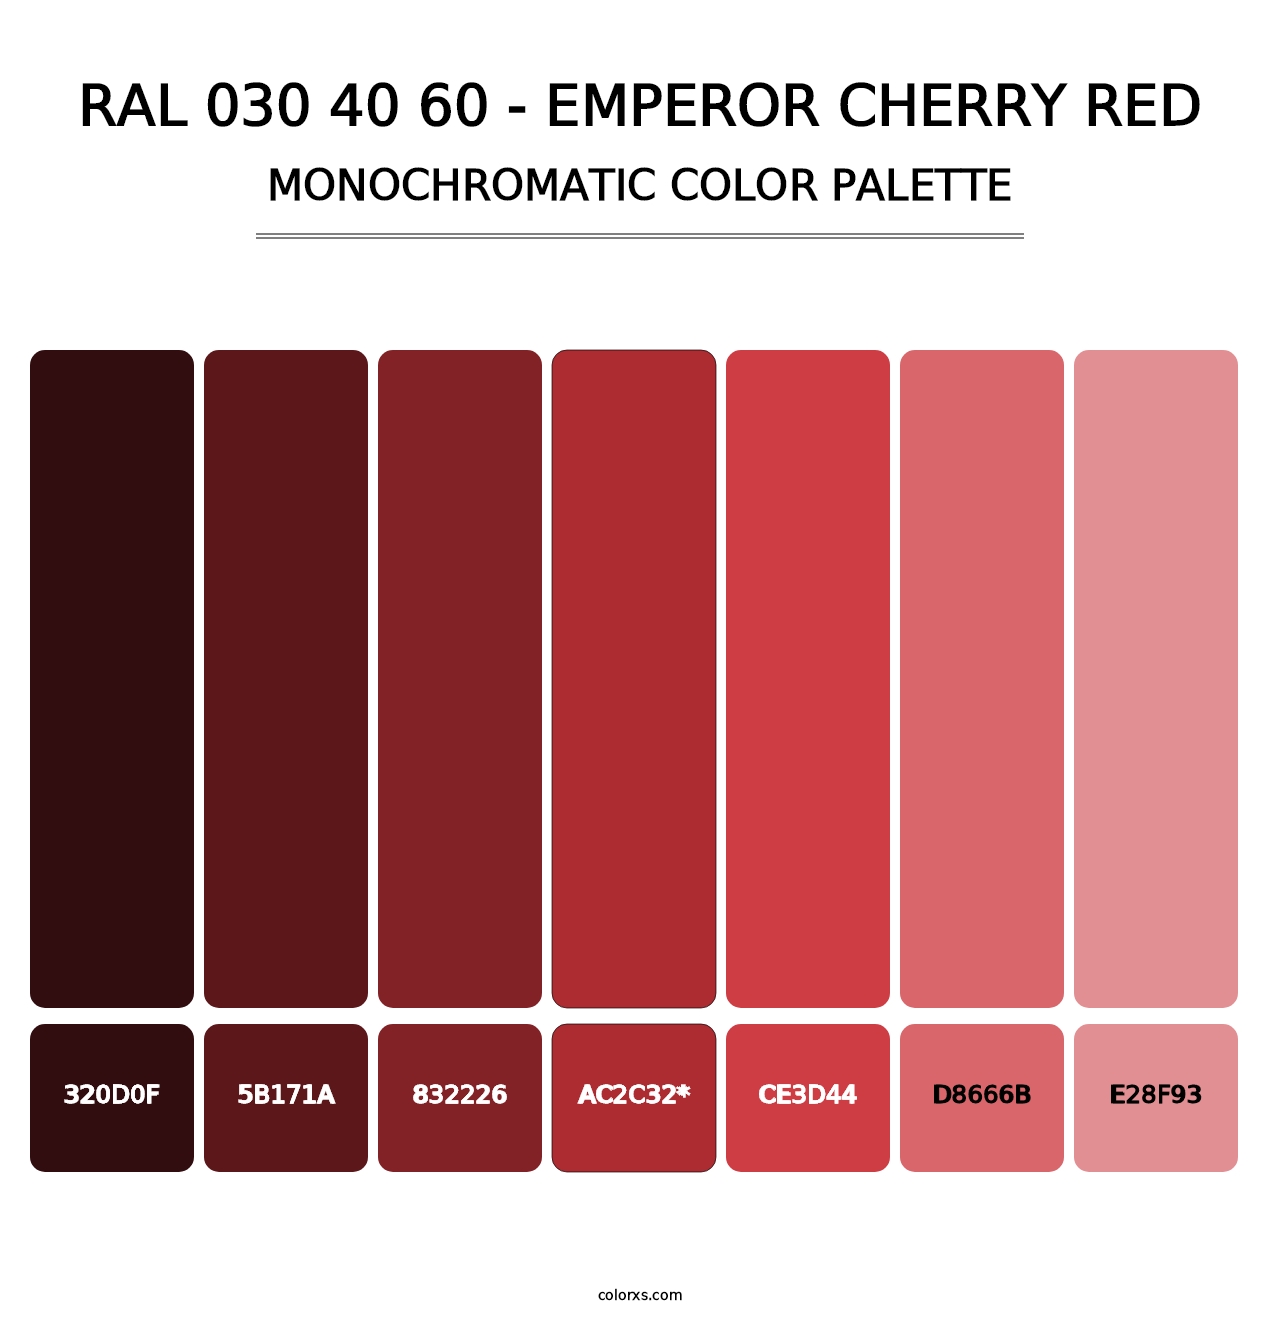 RAL 030 40 60 - Emperor Cherry Red - Monochromatic Color Palette